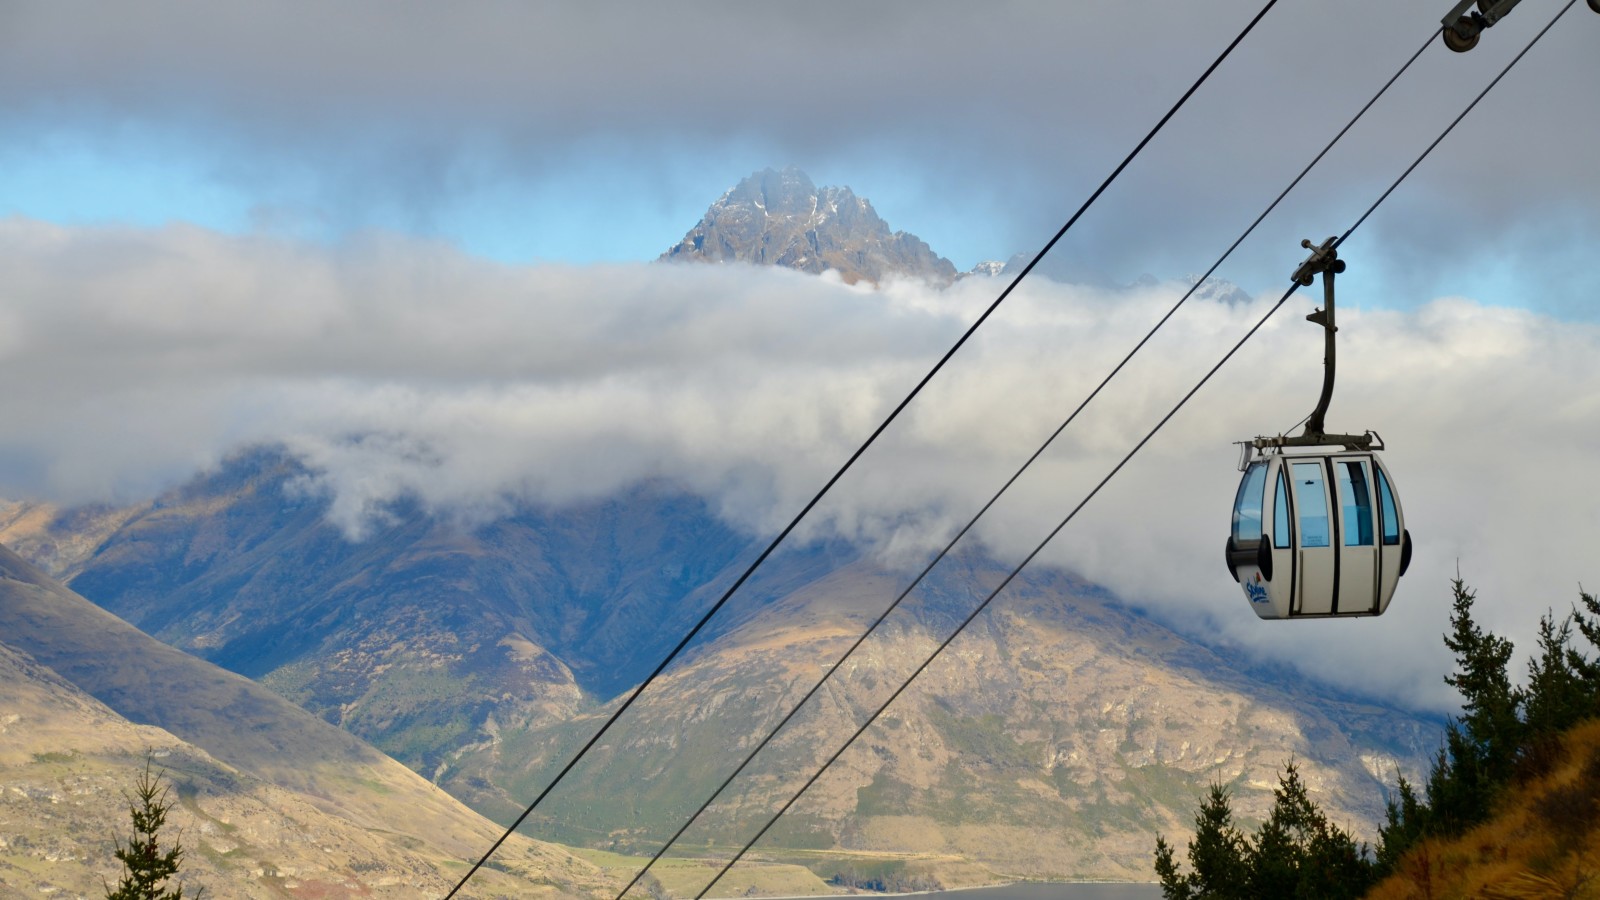 Gondola with mountains and clouds in Queenstown, NZ